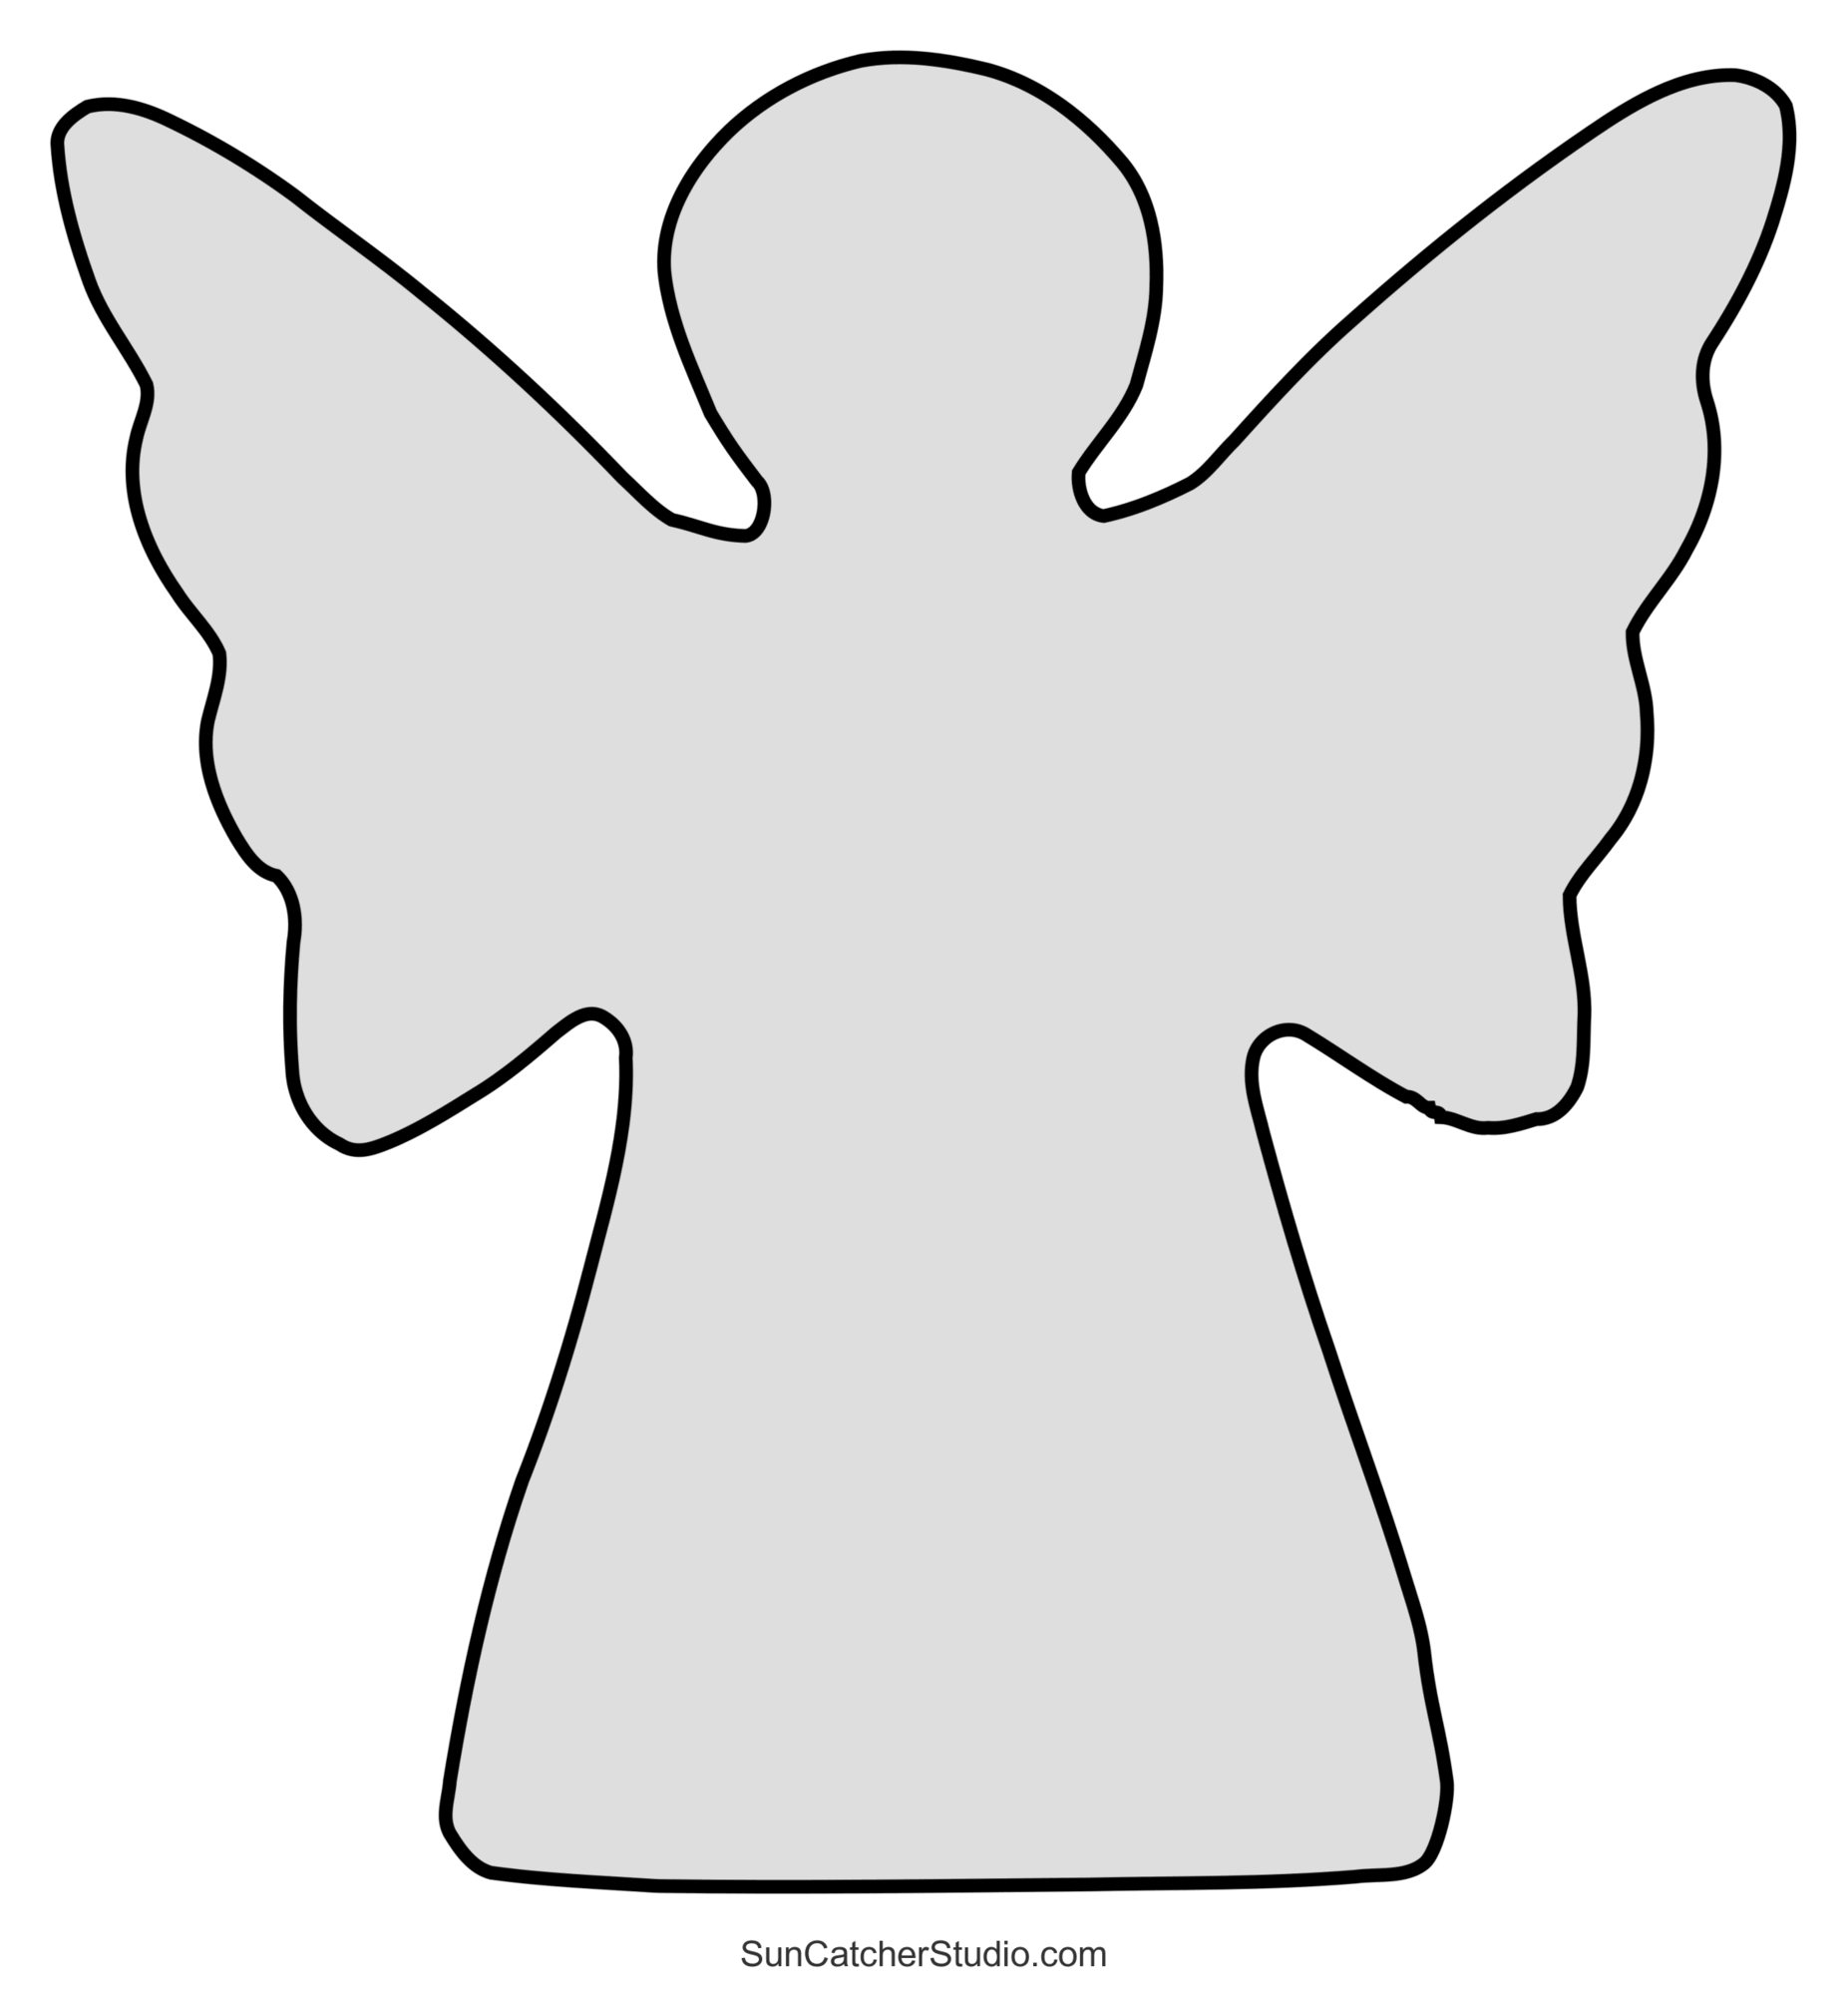 Angel Templates And Stencils Free Printable Patterns DIY Projects Patterns Monograms Designs Templates